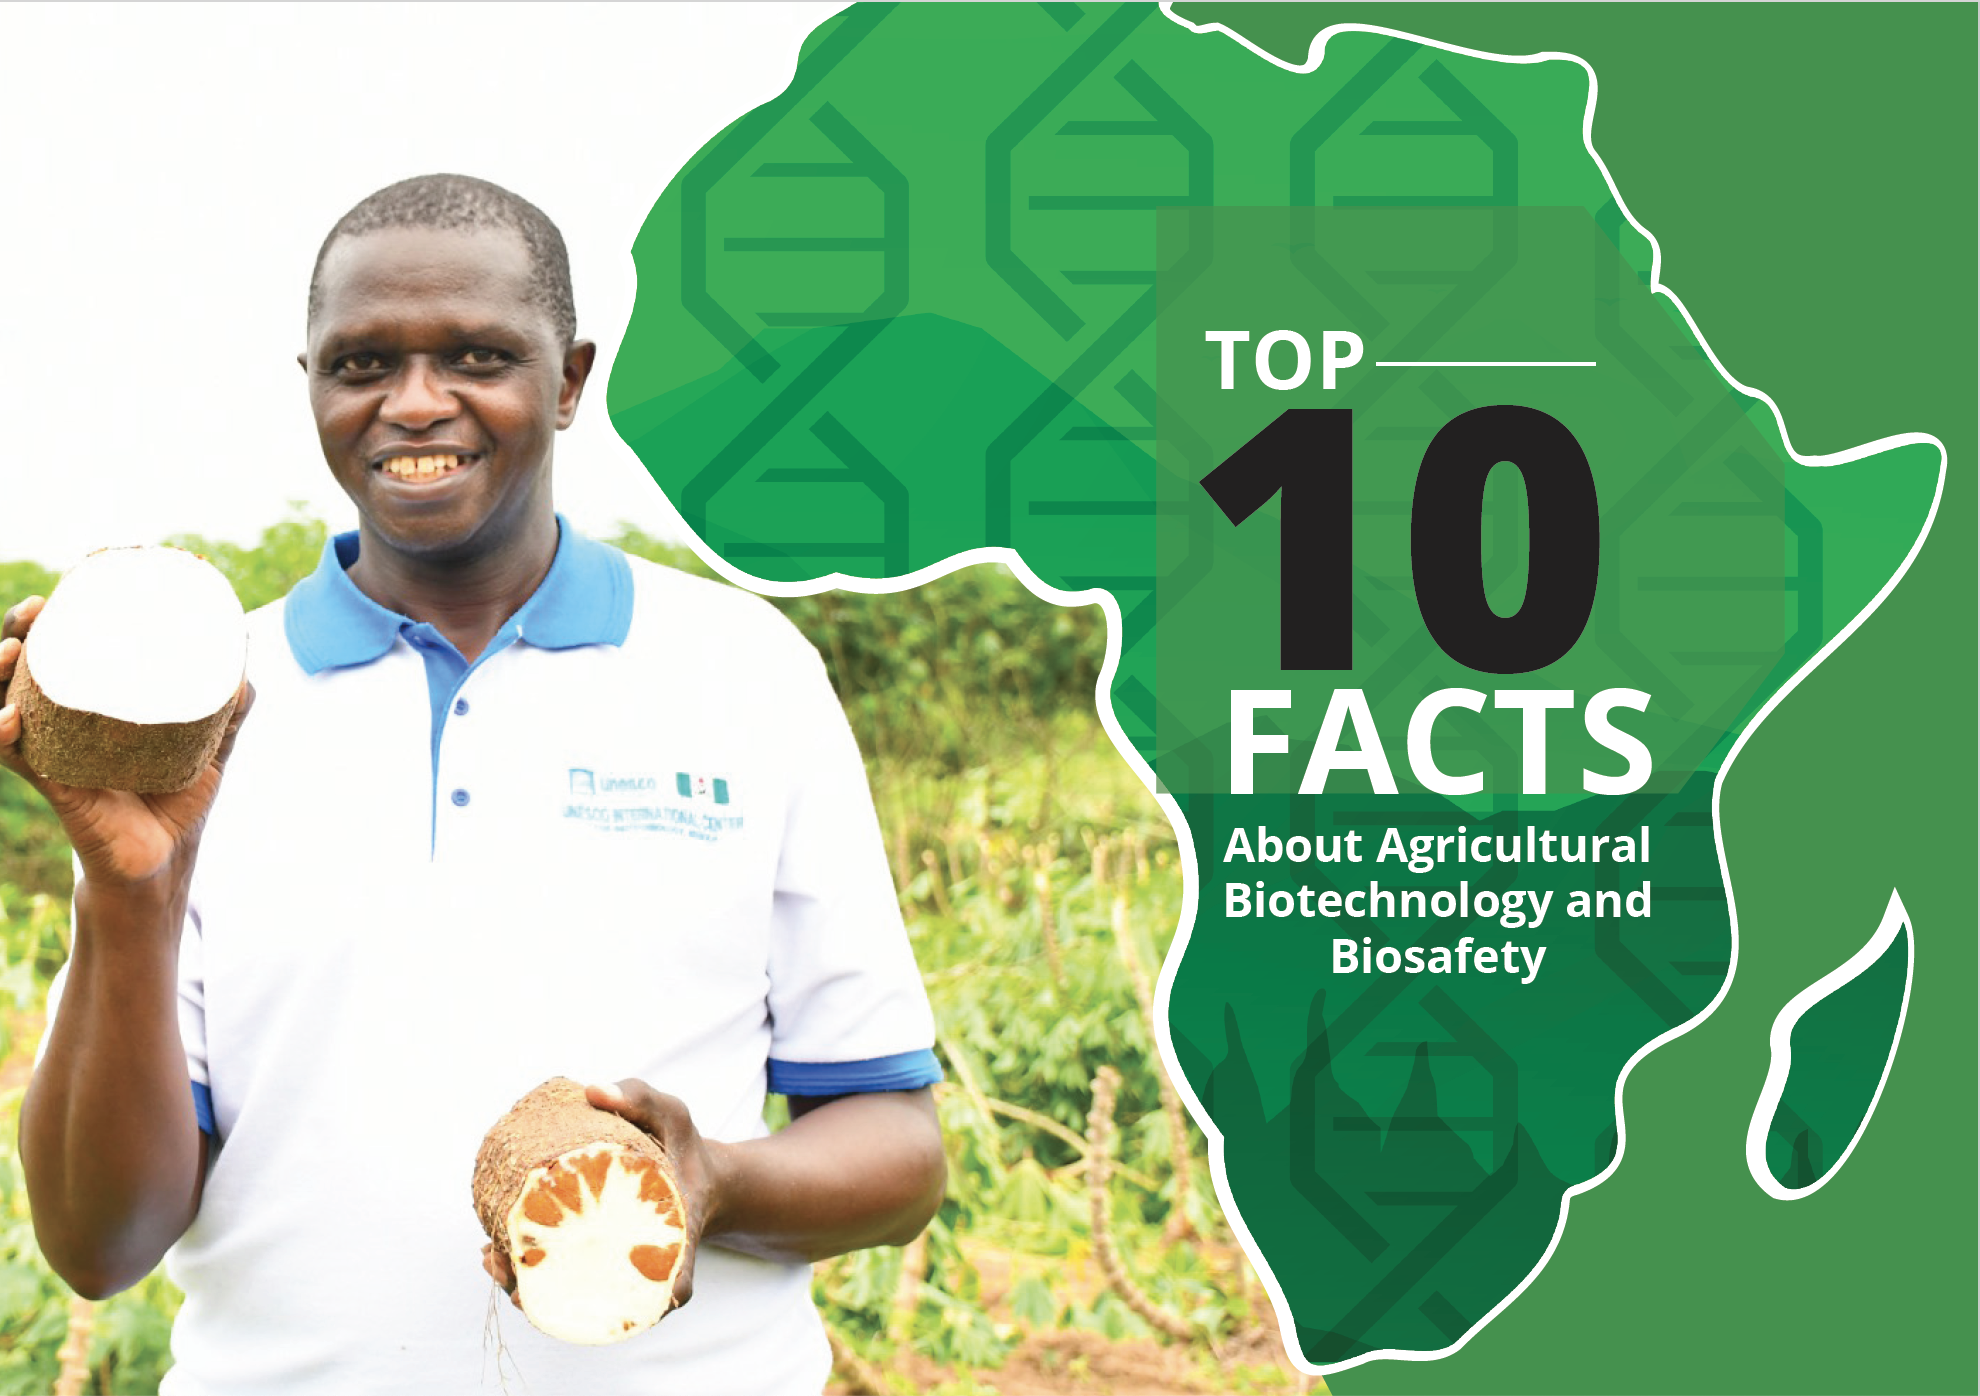 Africa Top Ten Facts on Biotech and Biosafety